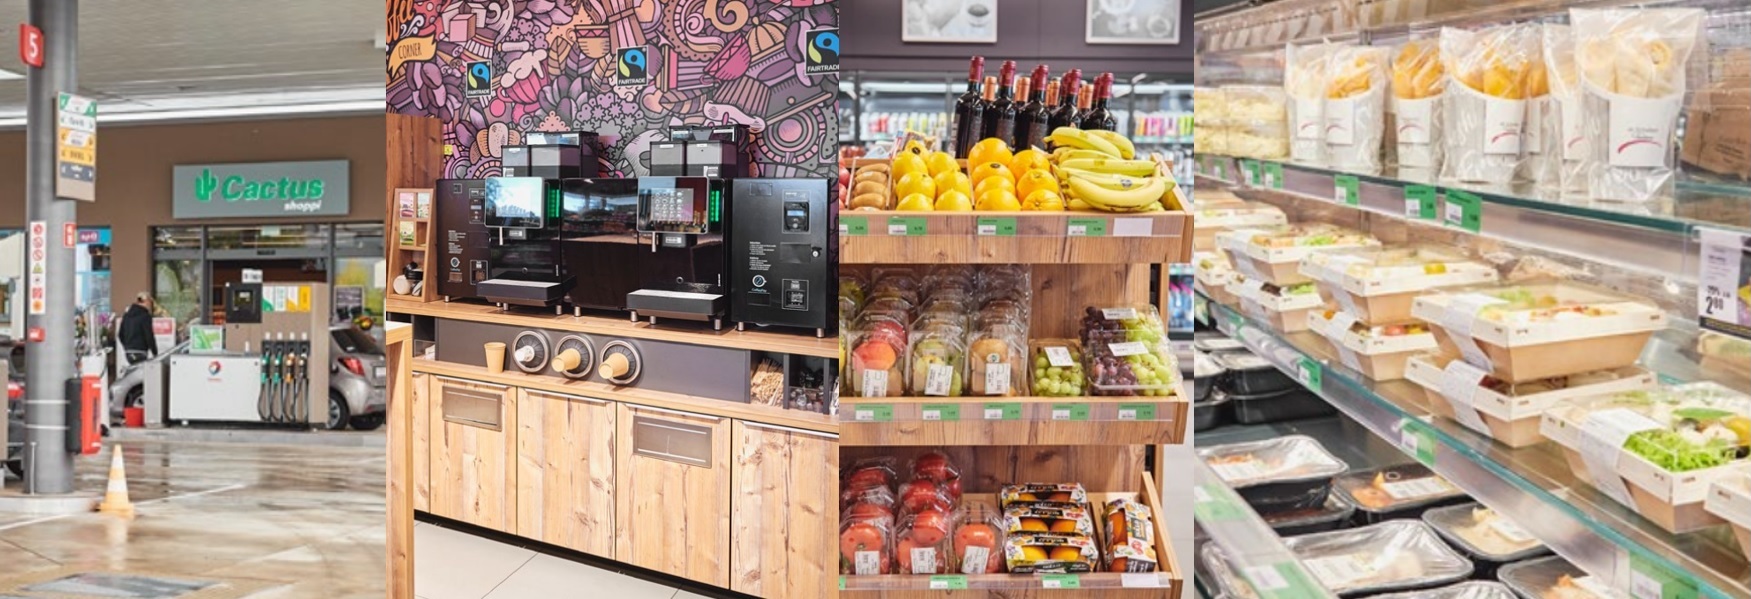 A montage image showing a petrol station forecourt, coffee machines, fresh produce, and ready-made food in a fridge.